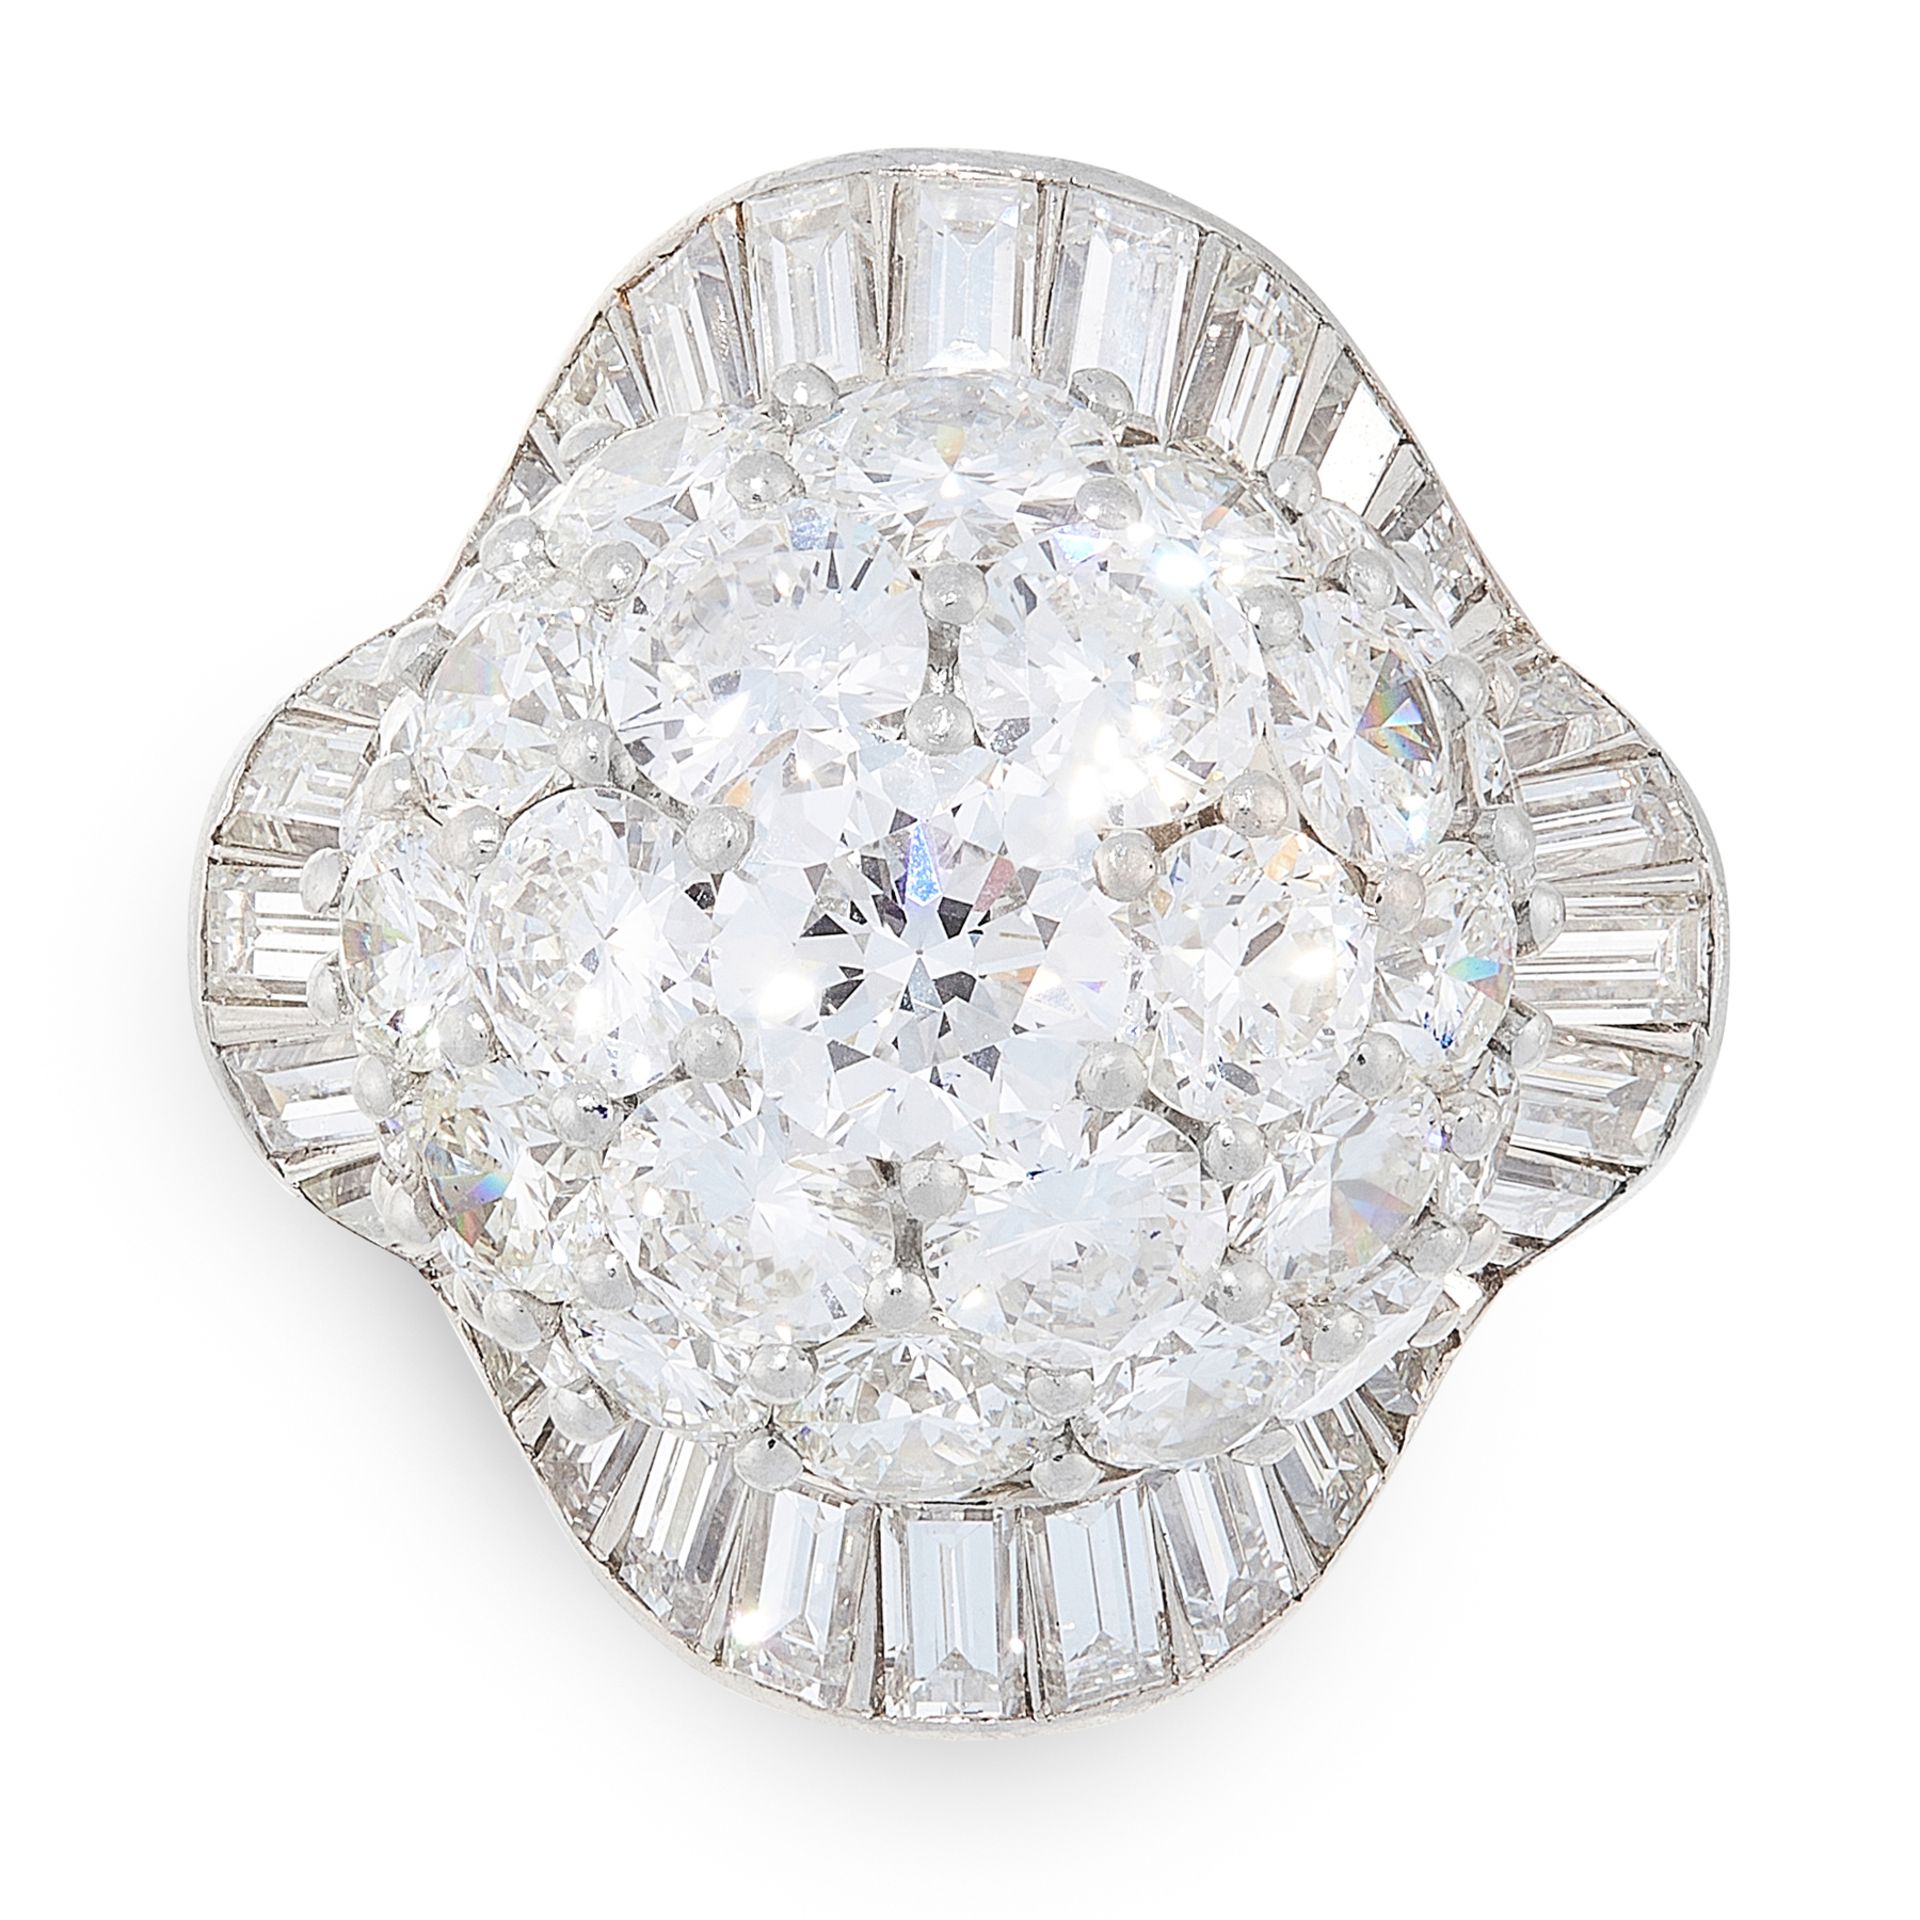 A VINTAGE DIAMOND COCKTAIL RING, ALBUQUERQUE in platinum, of bombe design, set allover with round